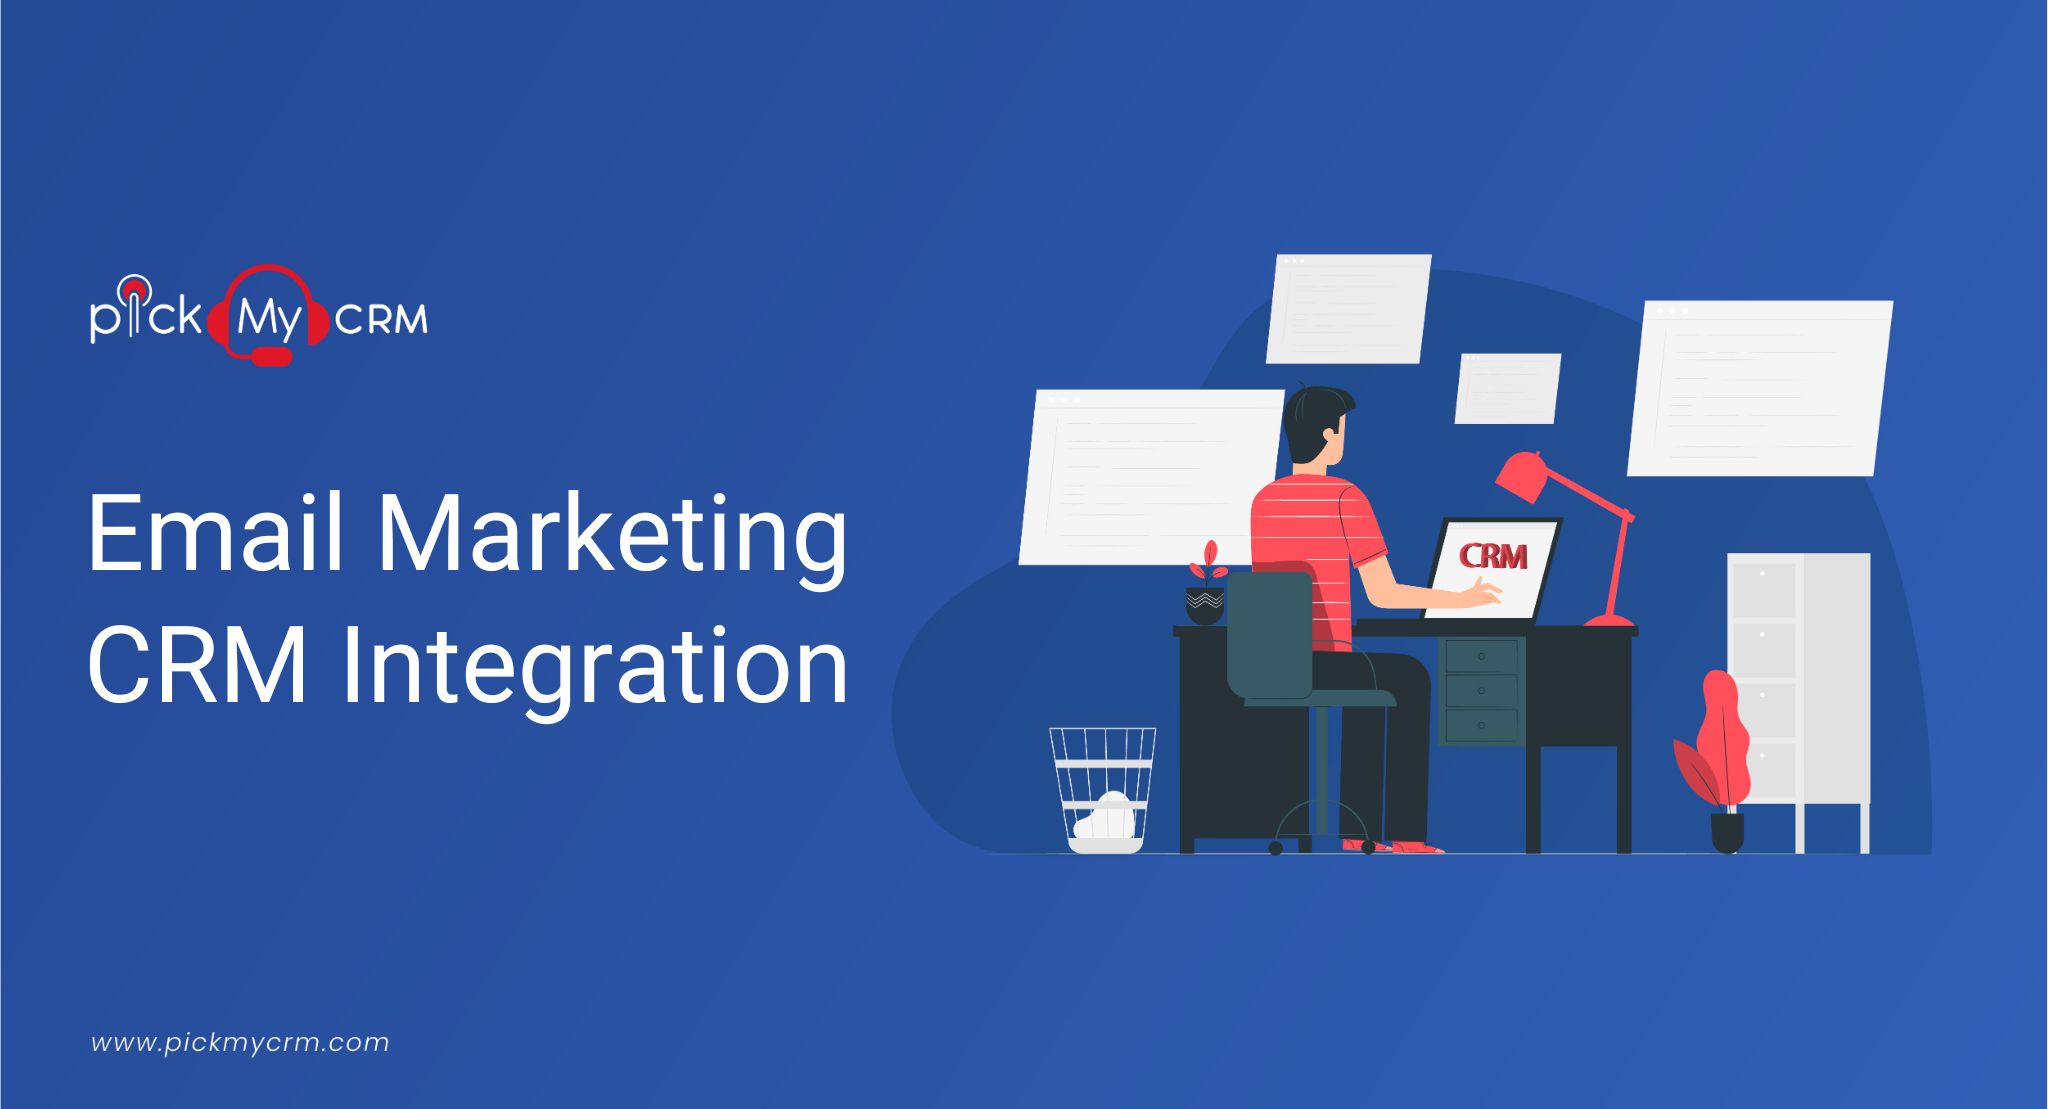 Integration of Email Marketing CRM